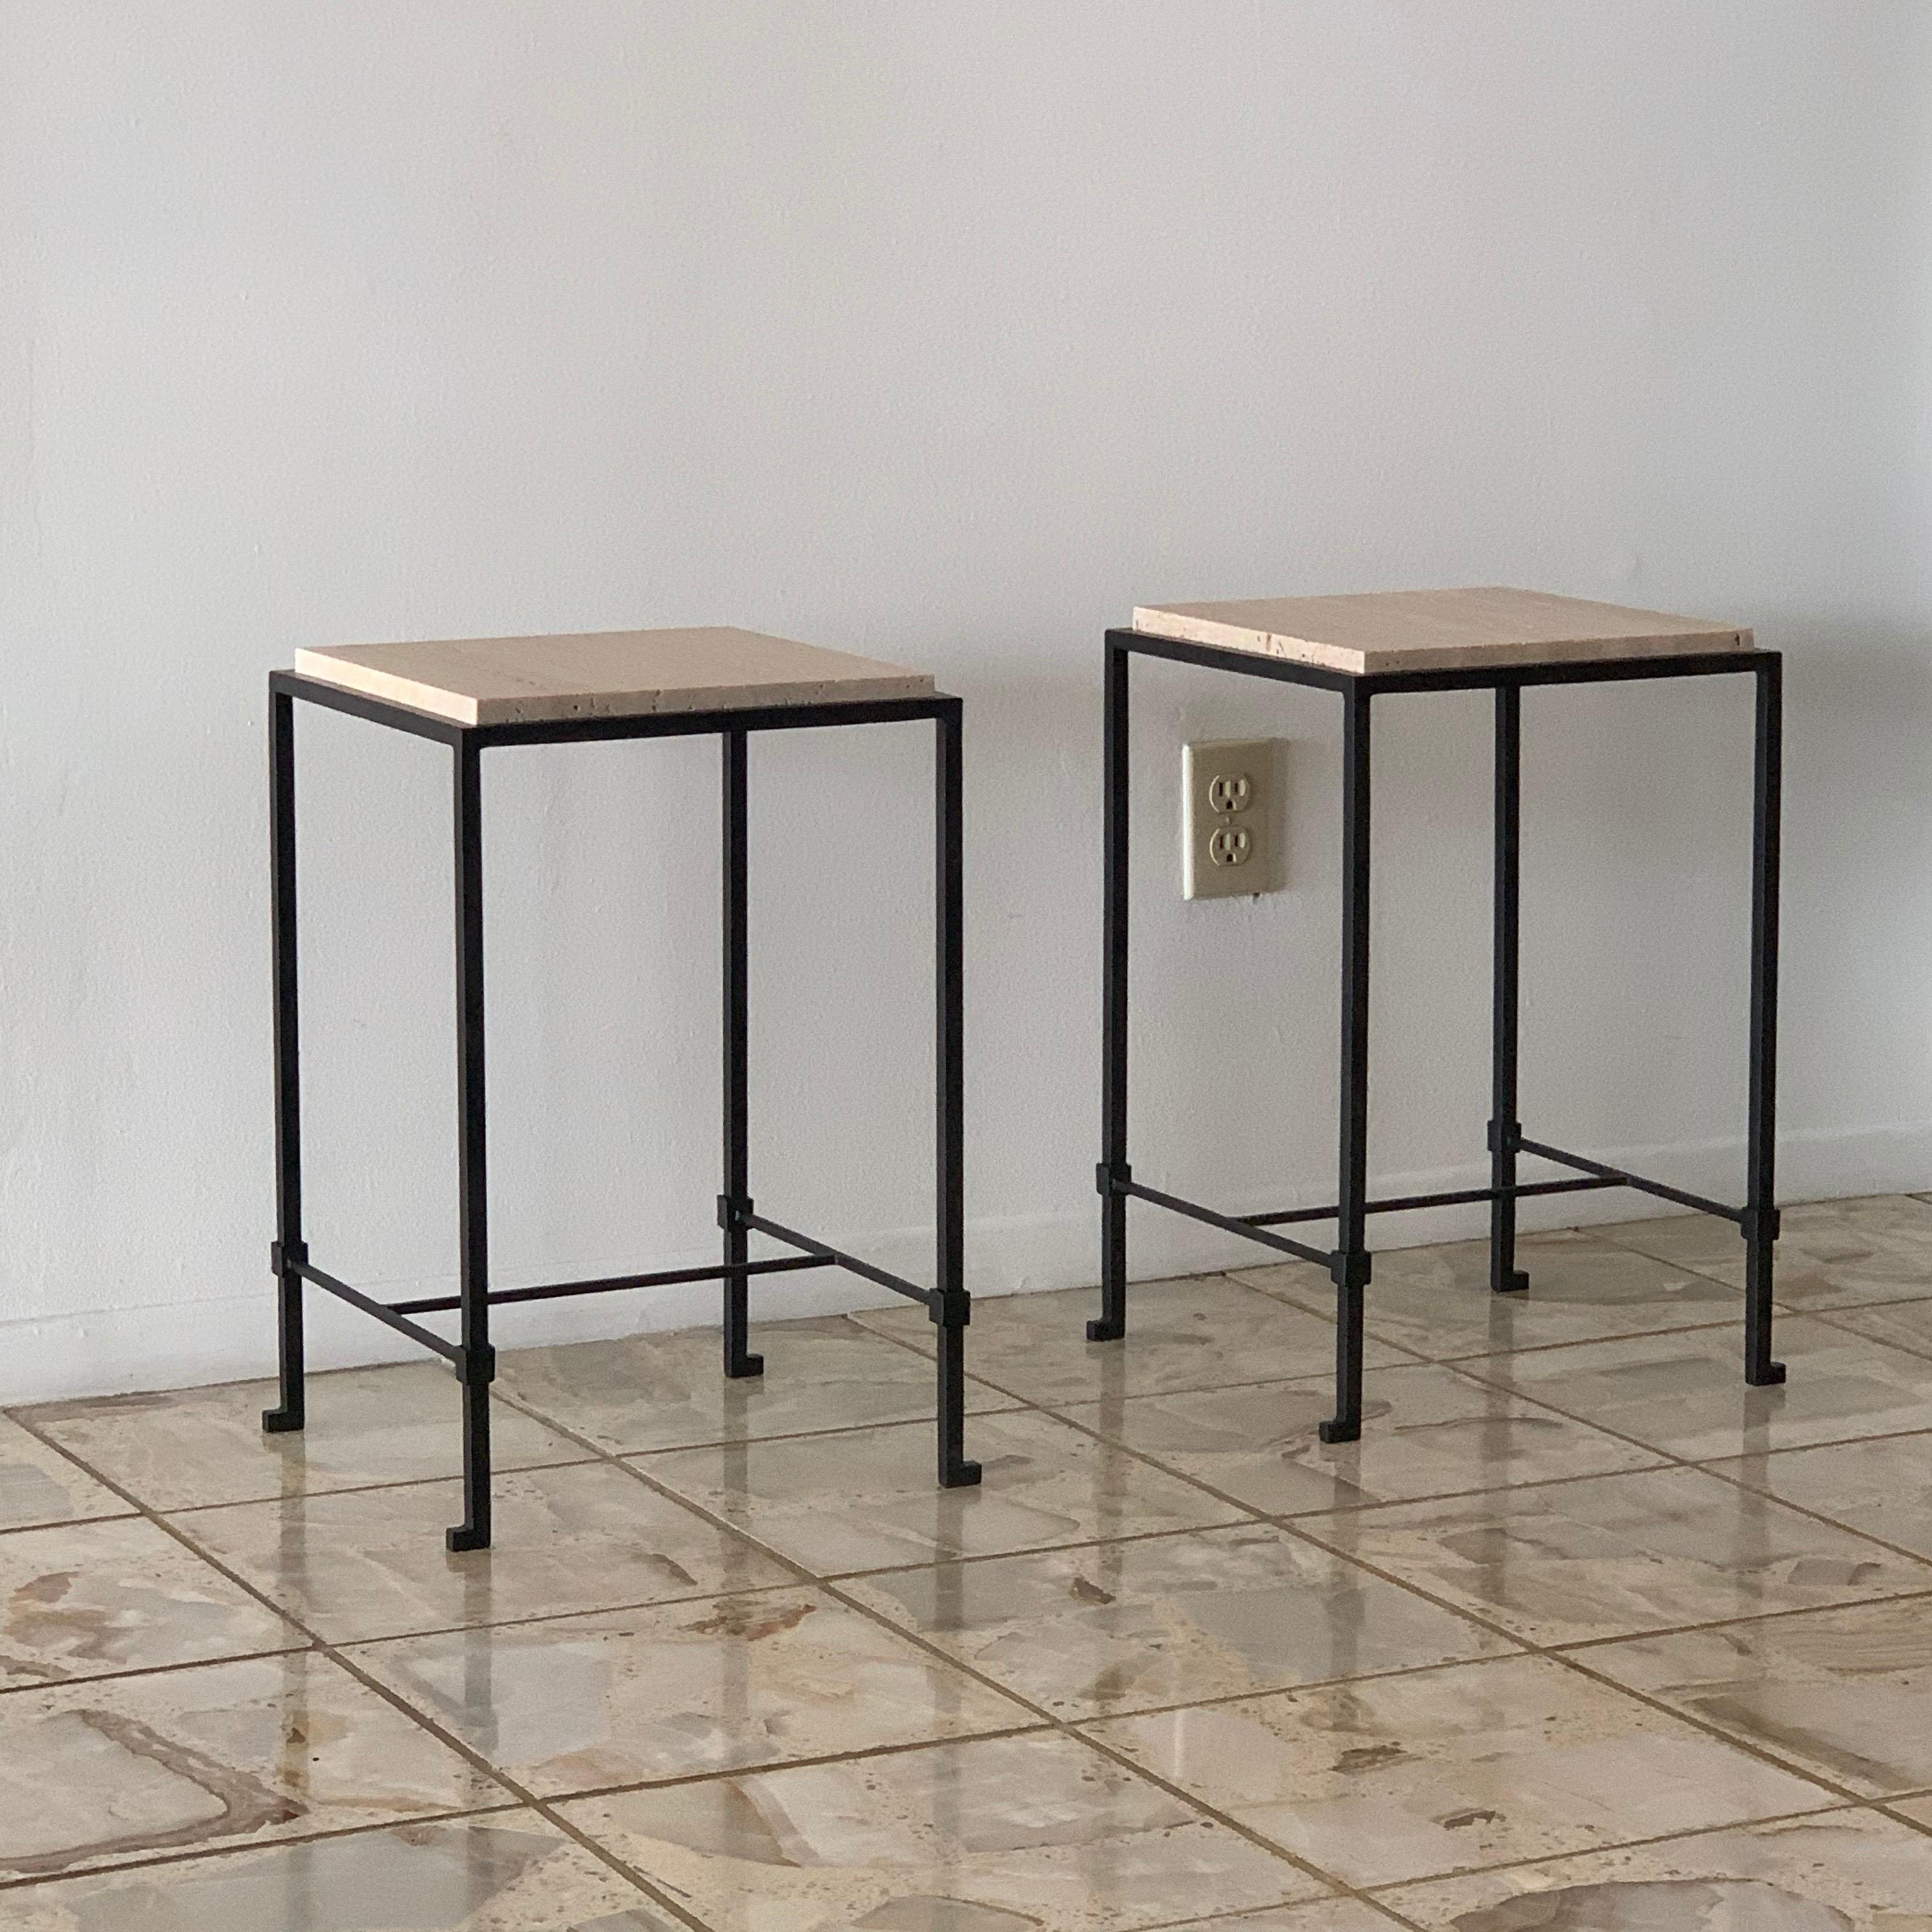 Pair of chic 'Diagramme' travertine drinks tables by Design Frères.

Slender powder-coated frames fitted with unfilled Italian travertine top inserts.

Inspired by the timeless aesthetic of French modern design, these tables from our exclusive